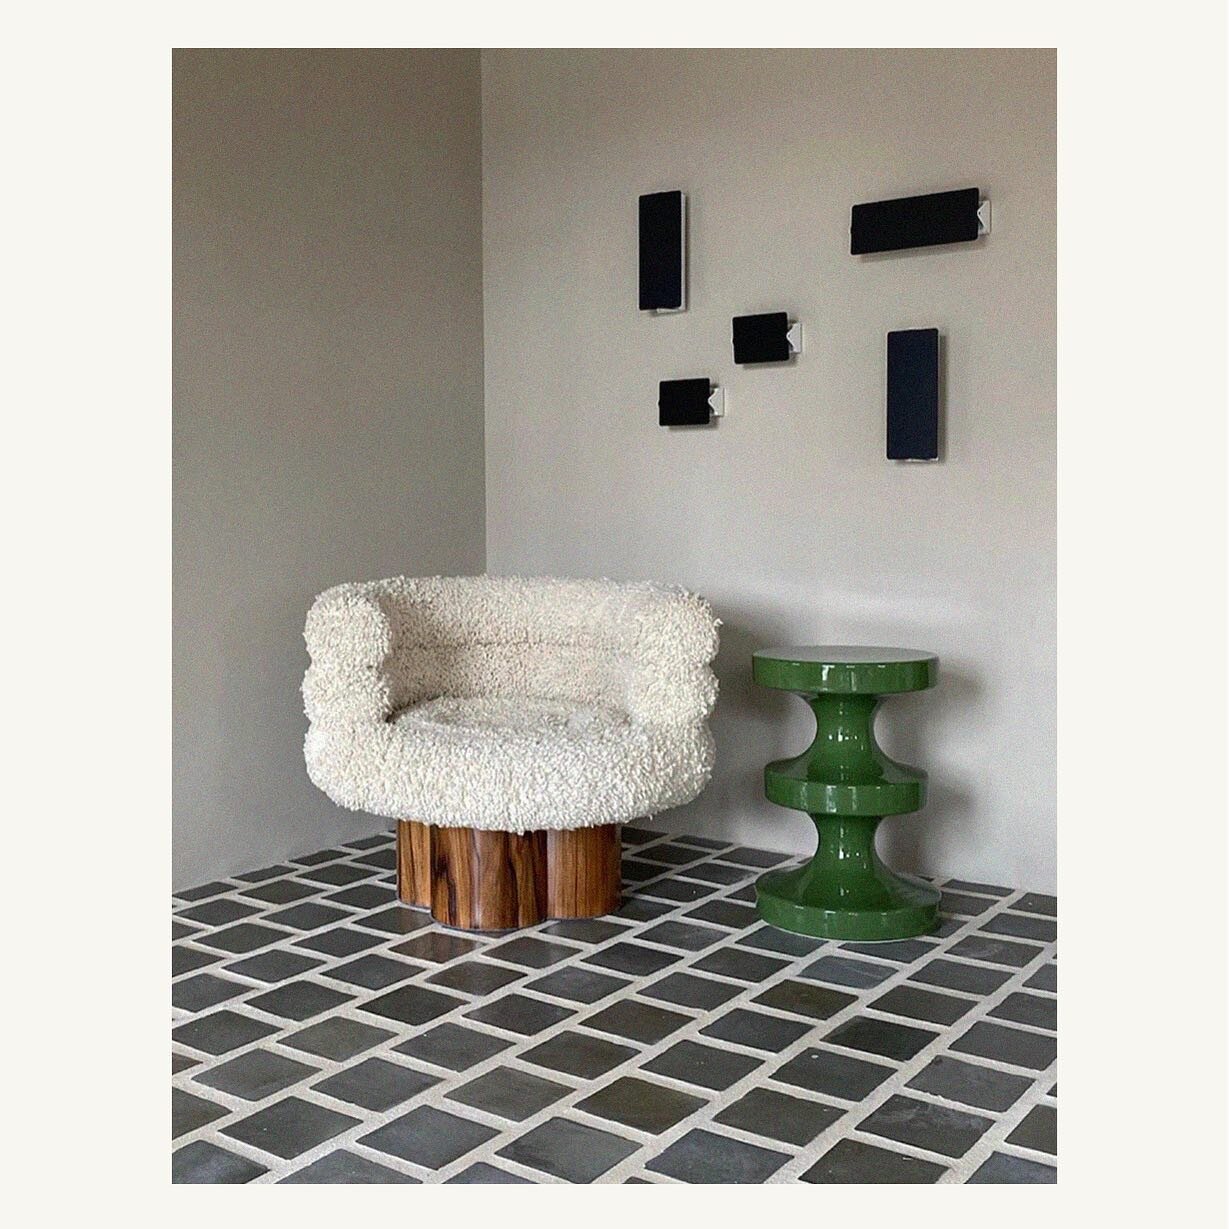 Lana Chair spotted @closedofficial store in Cologne, Germany. 

Interior design by @studiolansky 

 #Agnesstudio #Closed #lanachair #collectiblefurniture #design  #craftmanship #interiors